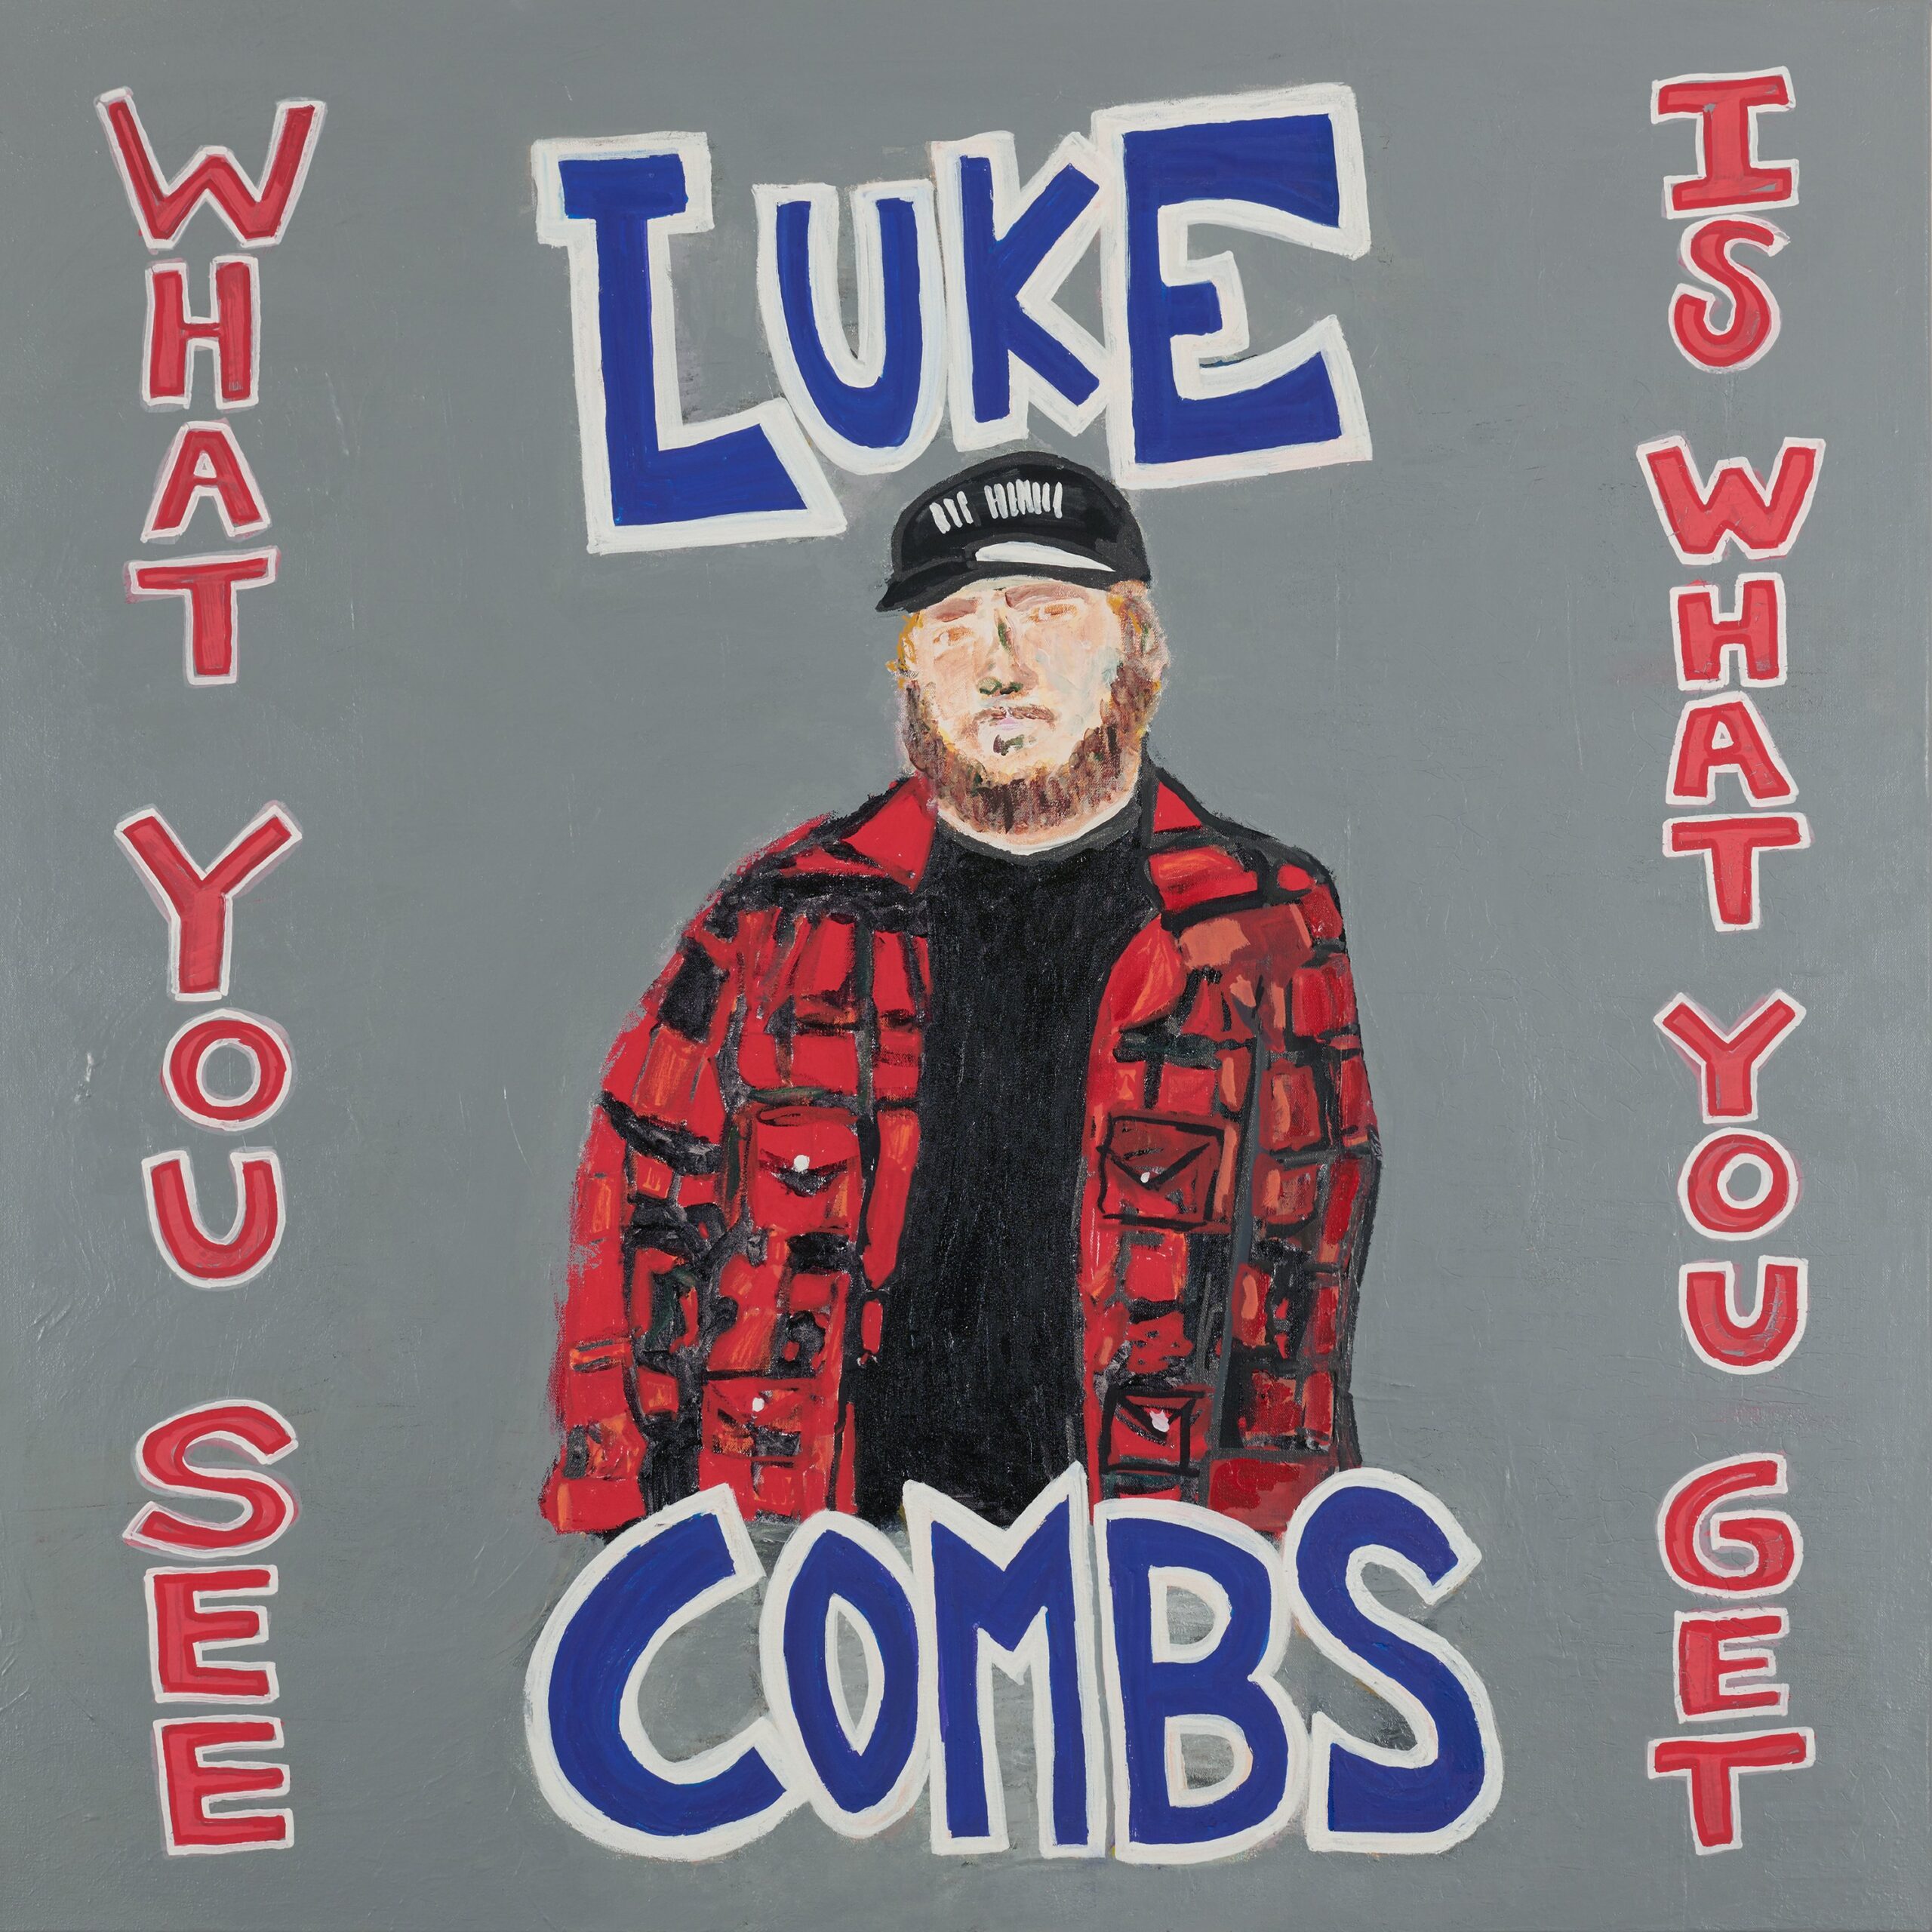 What you see is what you get – Luke Combs